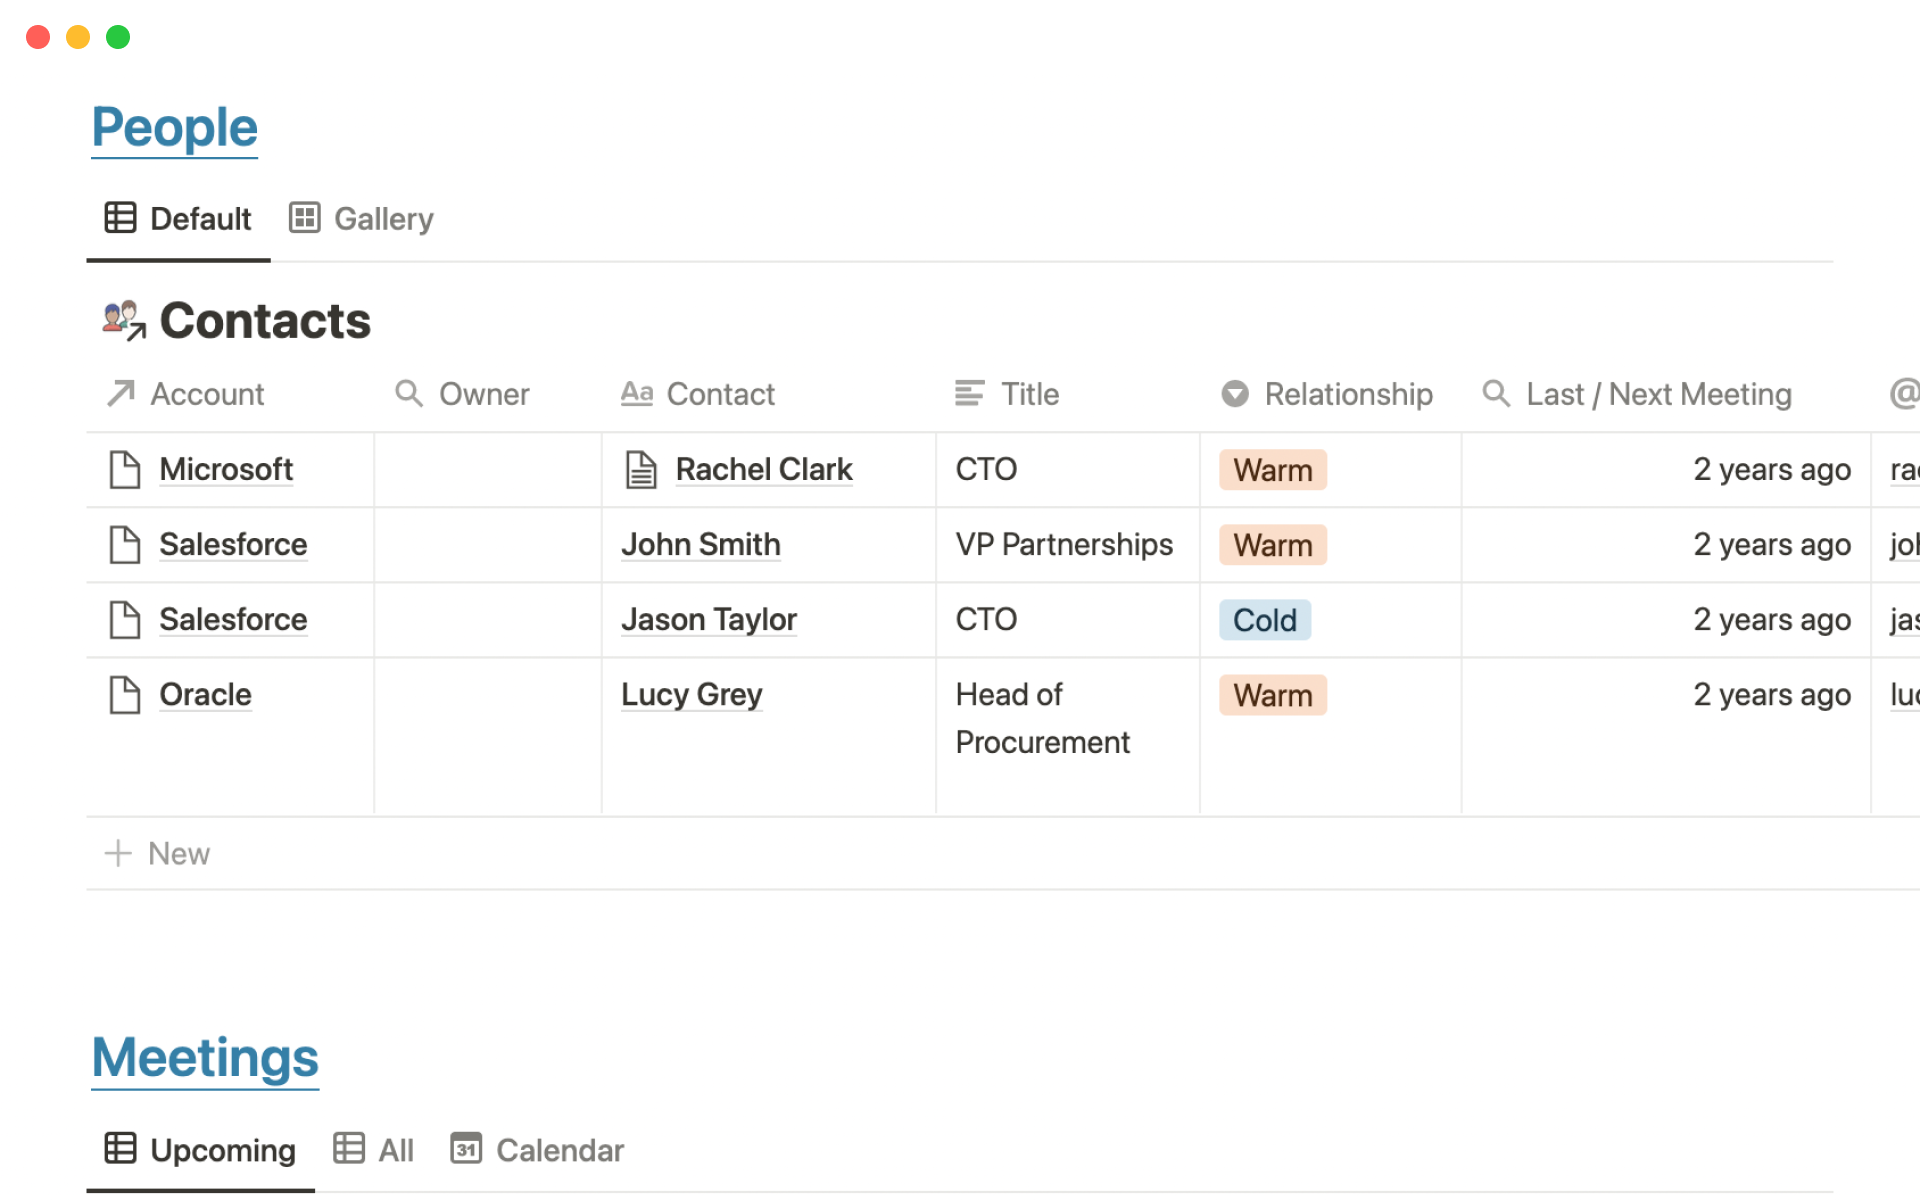 Manage your sales, schedule meetings and keep track of the companies and contacts that you work with.